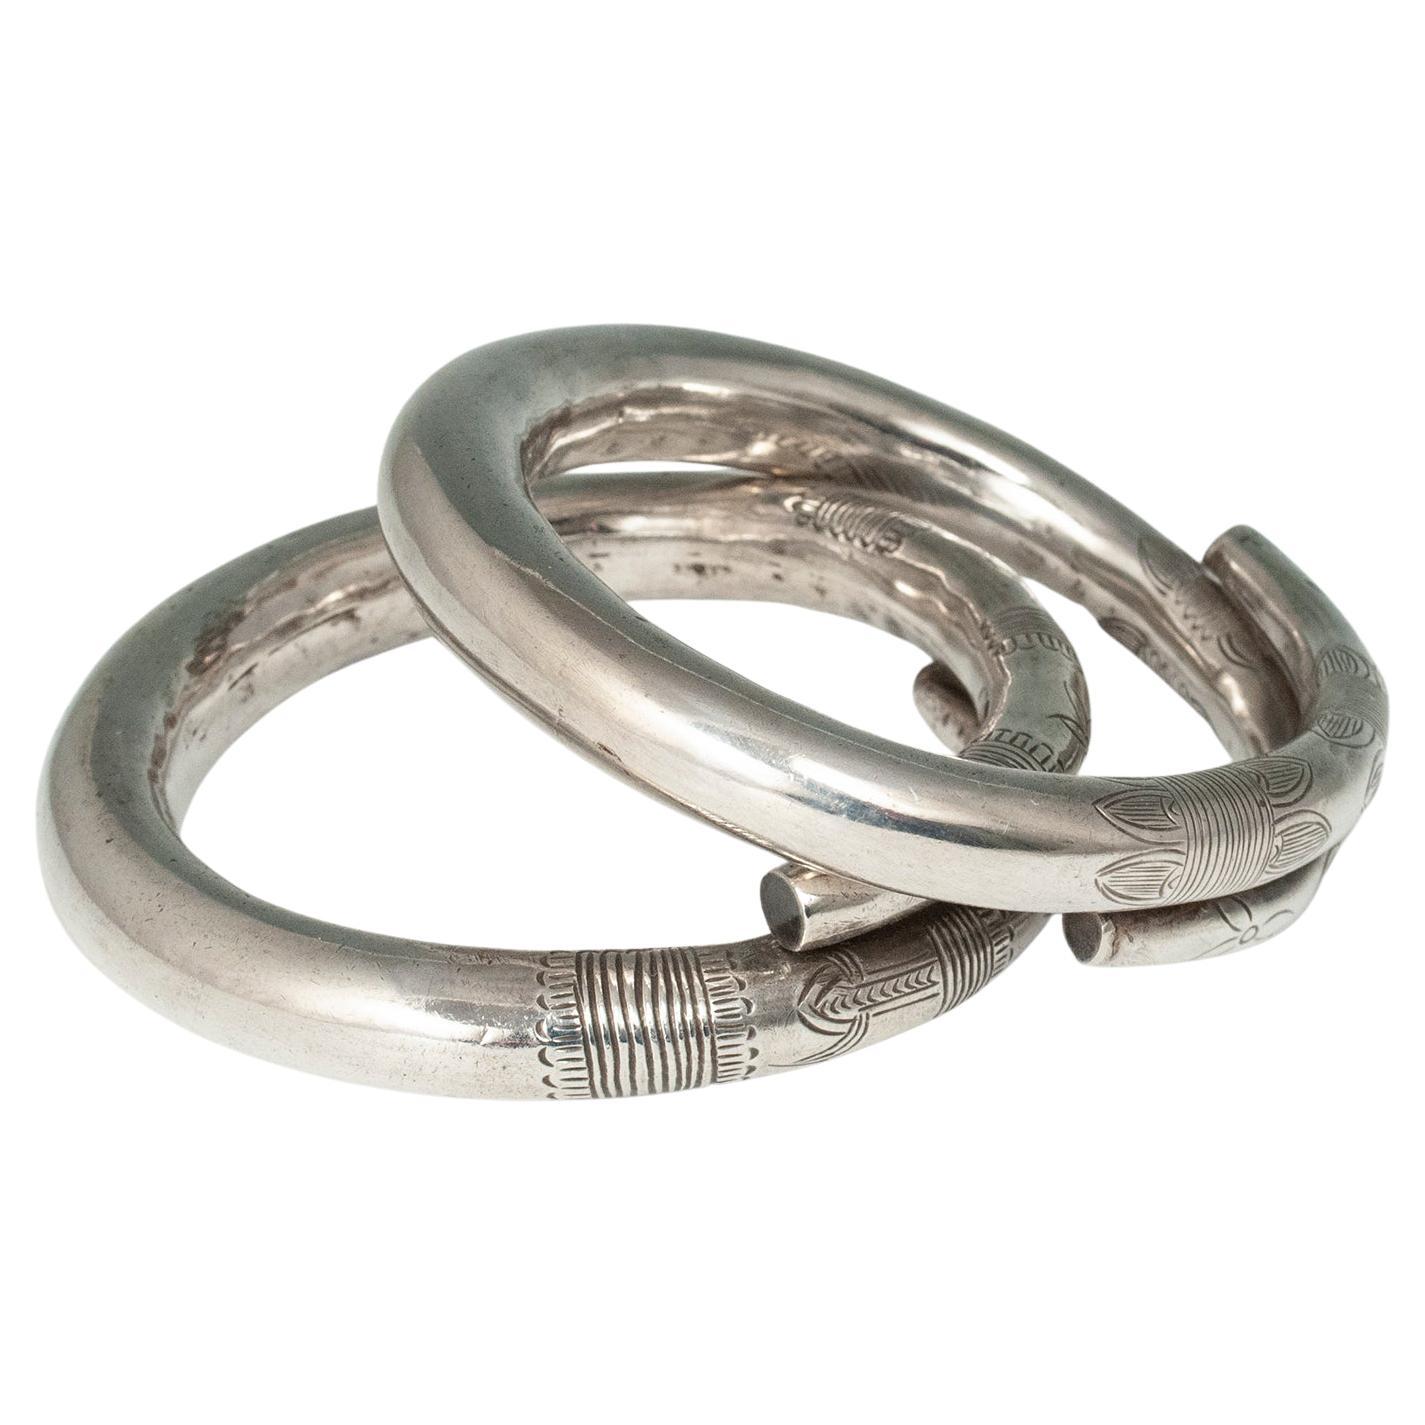 Mid-20th century pair of hollow silver incised bracelets, China

A pair of beautifully made hollow silver bracelets with incised floral and geometric designs. The interior circumference is 8-1/8 inches (20.6 cm), the interior diameter is 2.5